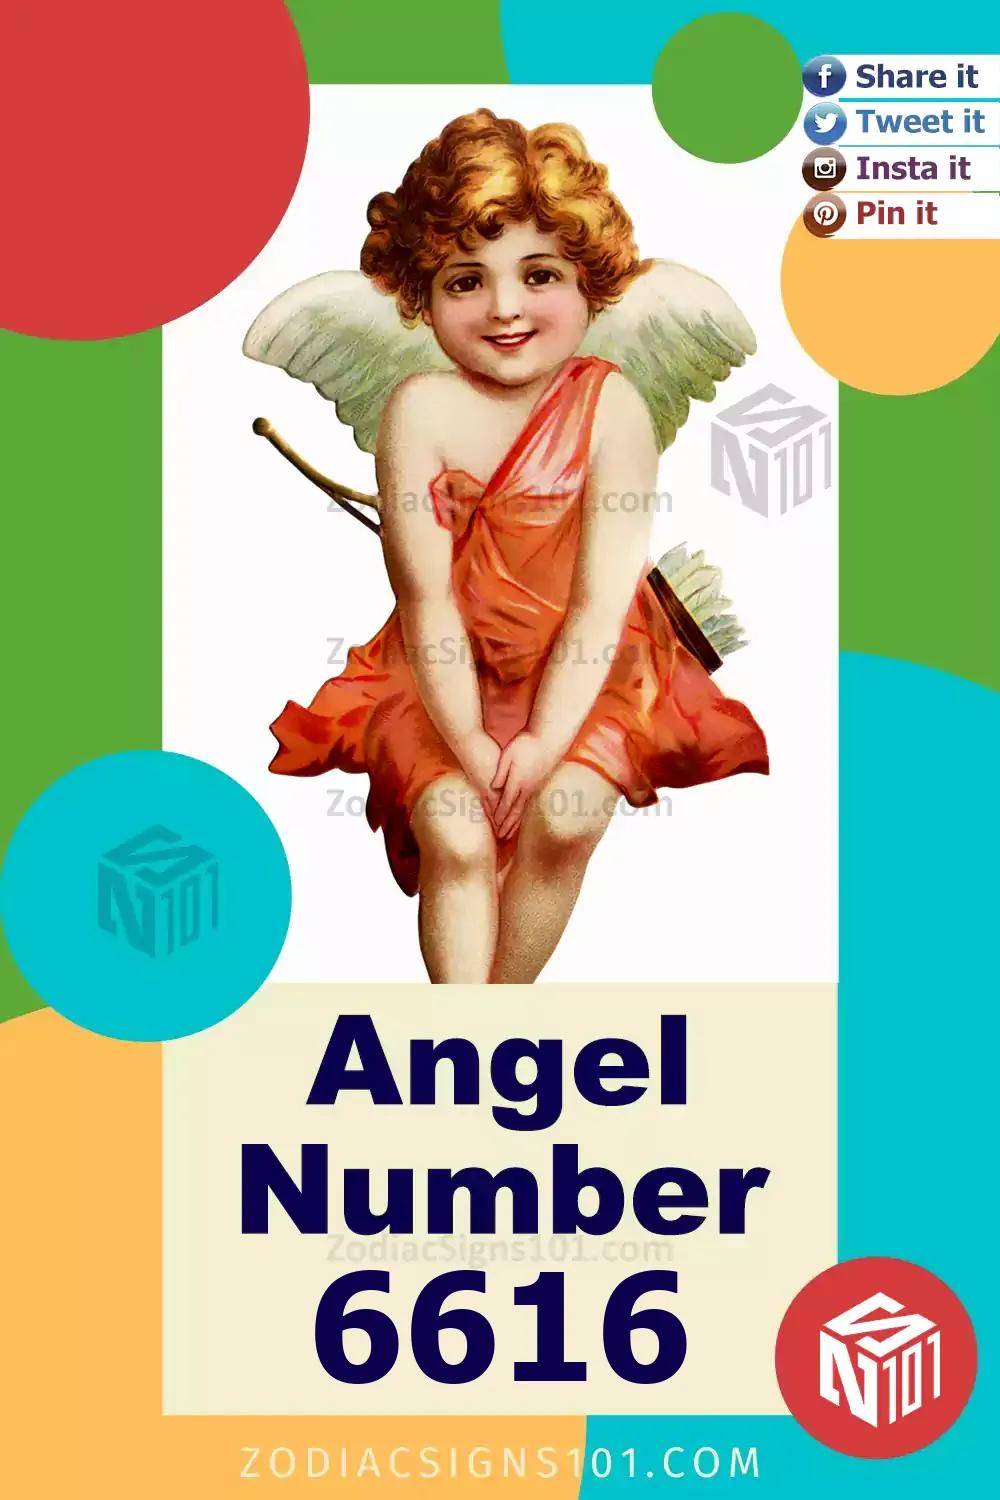 6616 Angel Number Meaning